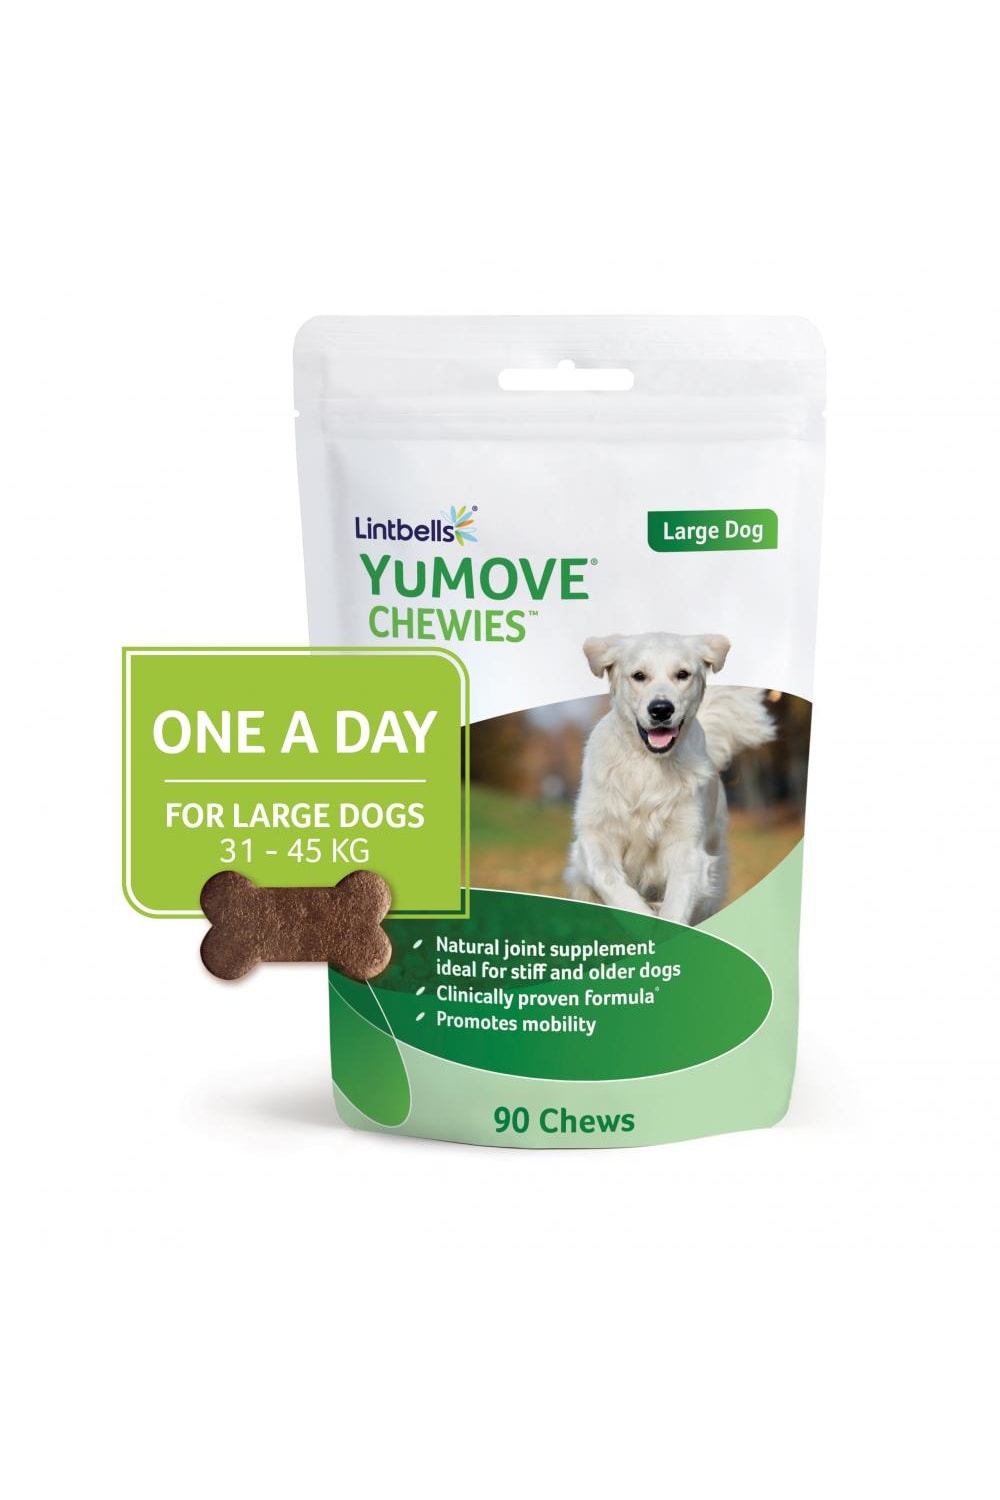 Lintbells YuCalm Dogs One-a-Day Chewies (Pack of 30) (May Vary) (M)